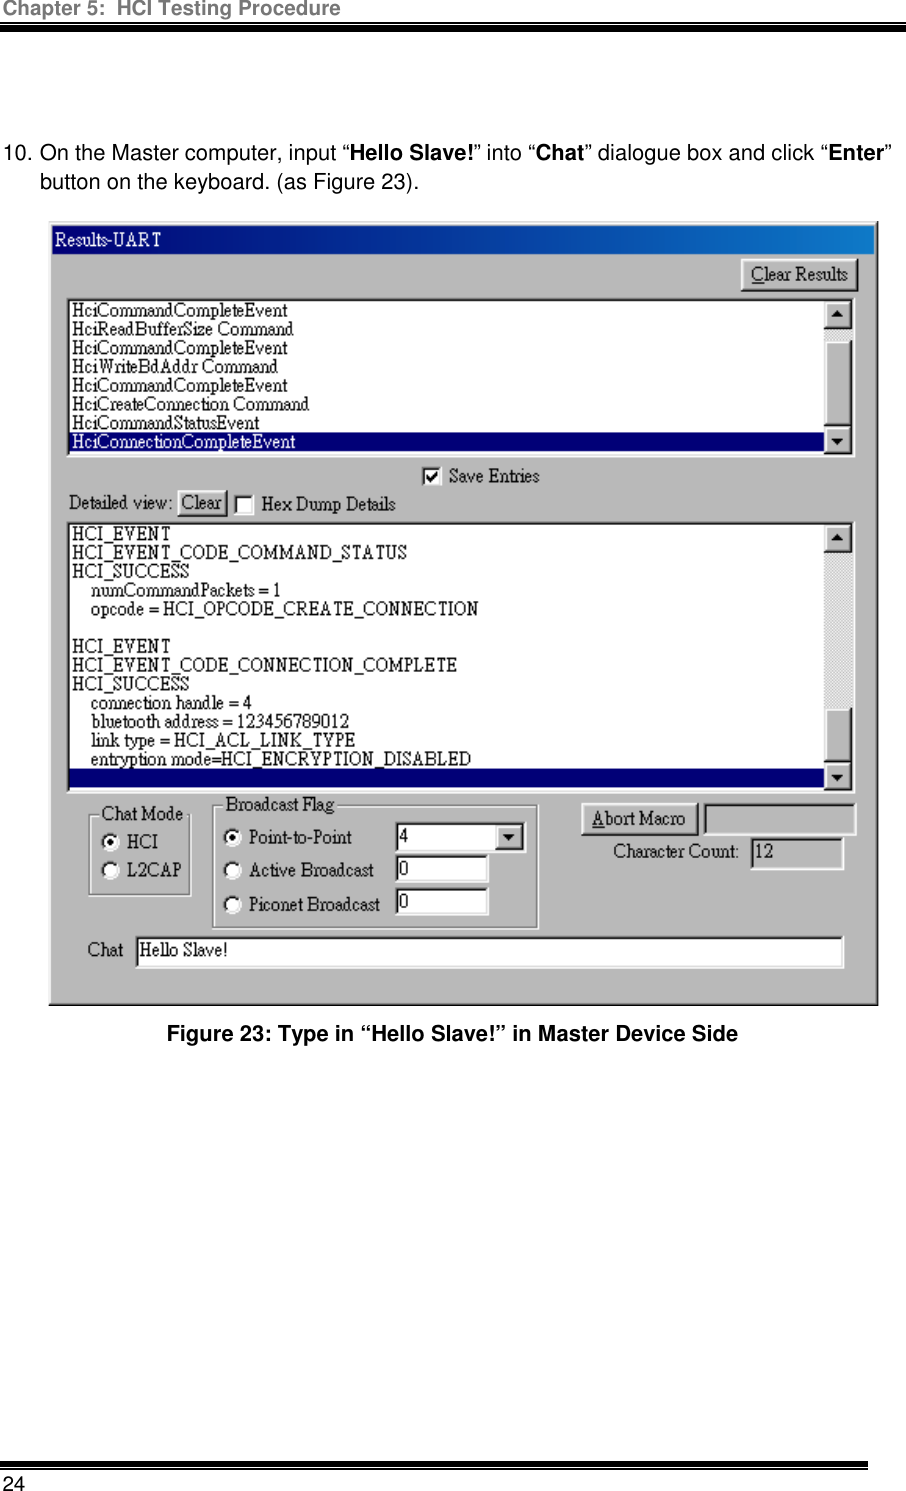 Chapter 5:  HCI Testing Procedure  24   10. On the Master computer, input “Hello Slave!” into “Chat” dialogue box and click “Enter” button on the keyboard. (as Figure 23). Figure 23: Type in “Hello Slave!” in Master Device Side 